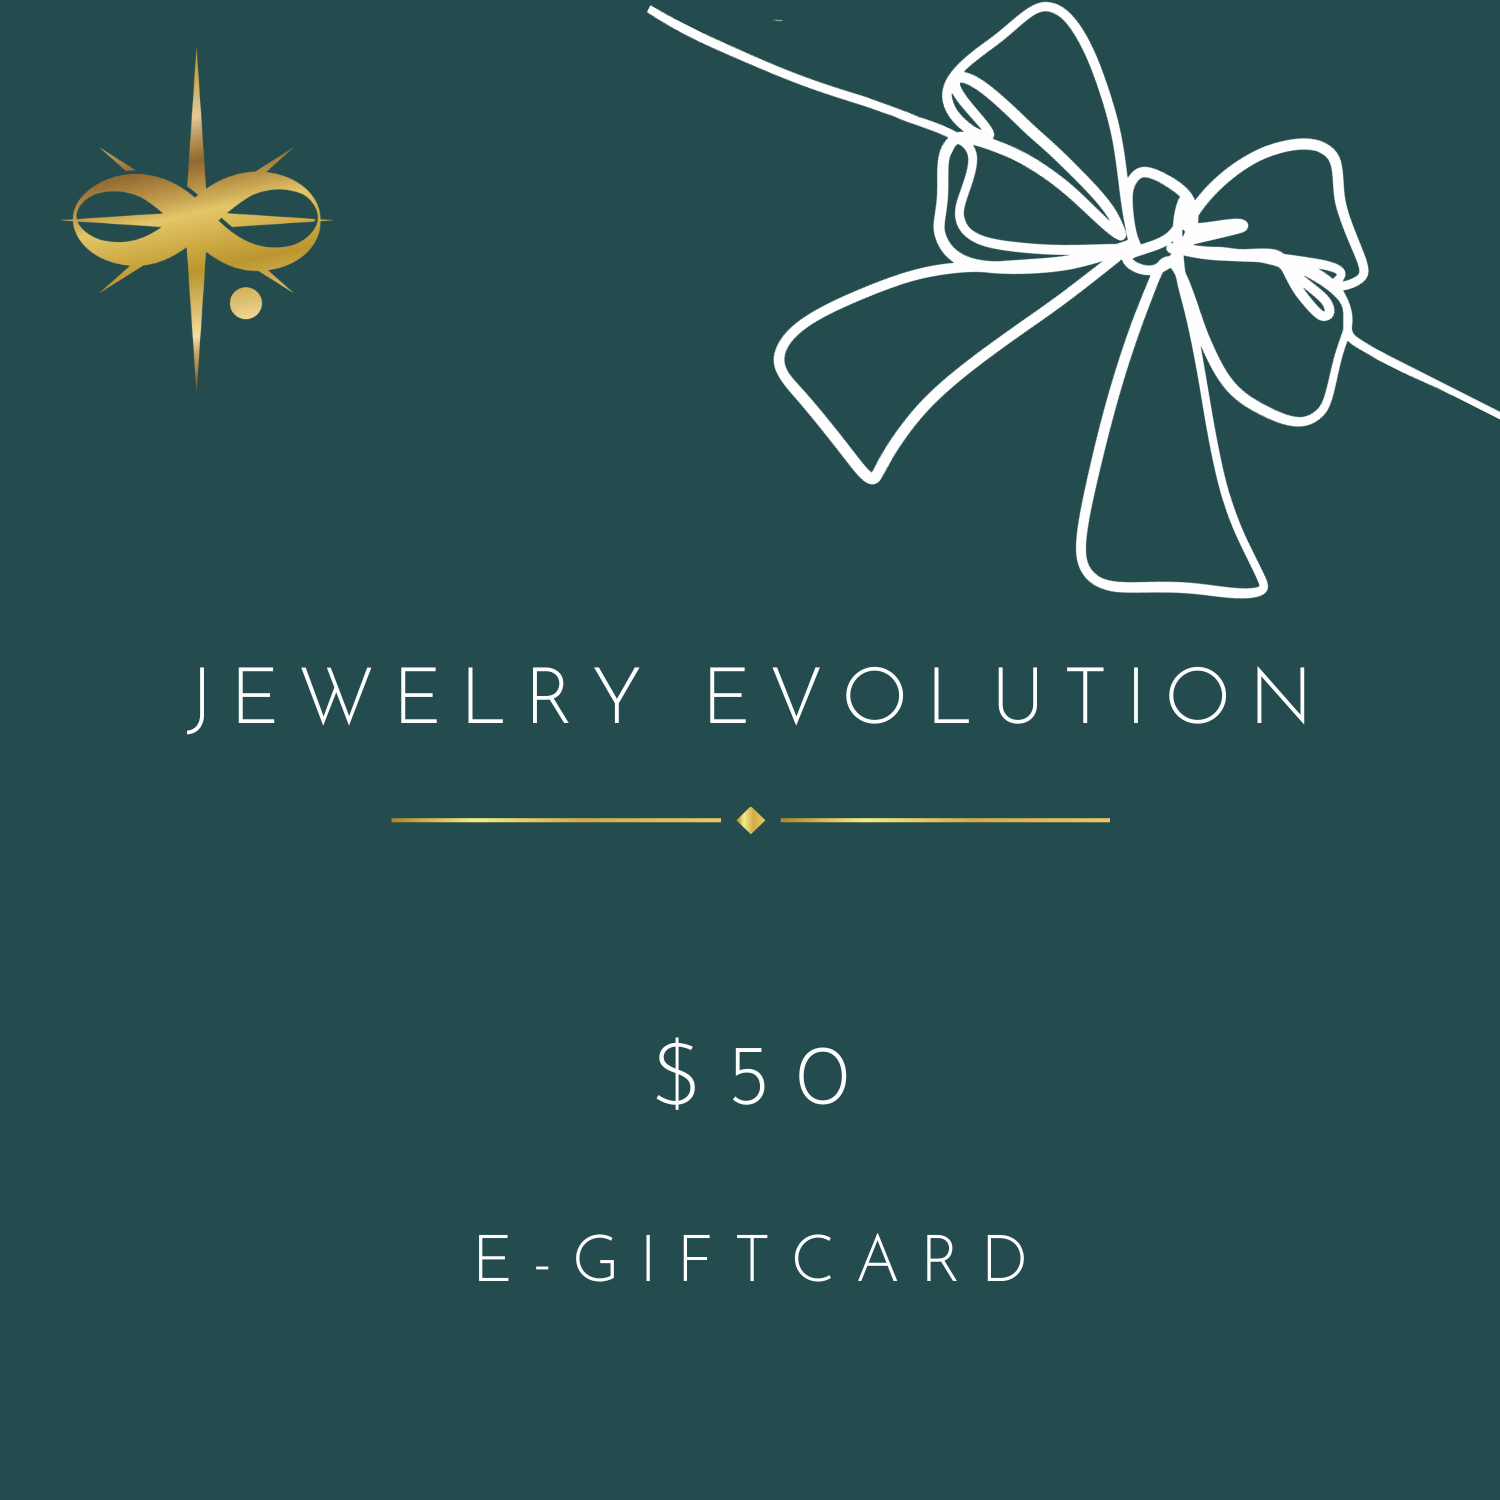 Jewelry Evolution Gift Card $50.00 Gift Card